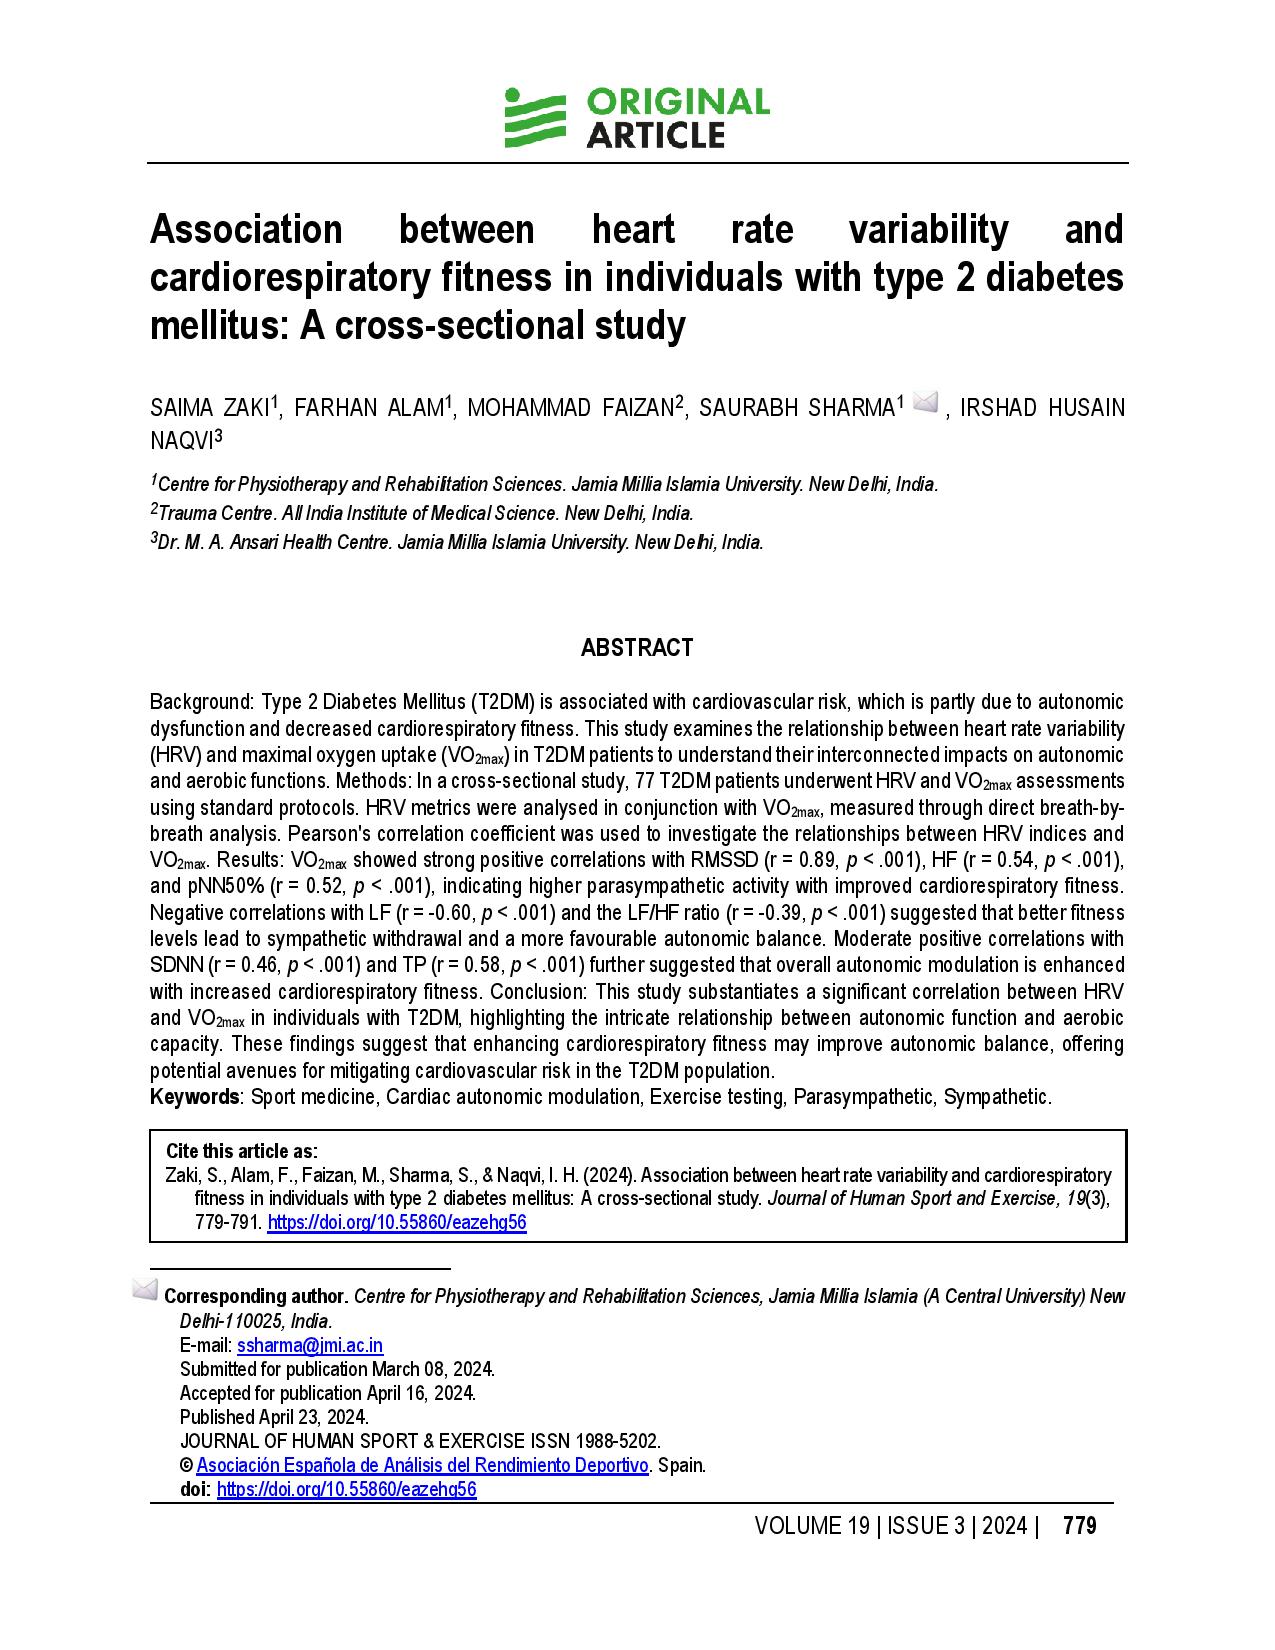 Association between heart rate variability and cardiorespiratory fitness in individuals with type 2 diabetes mellitus: A cross-sectional study